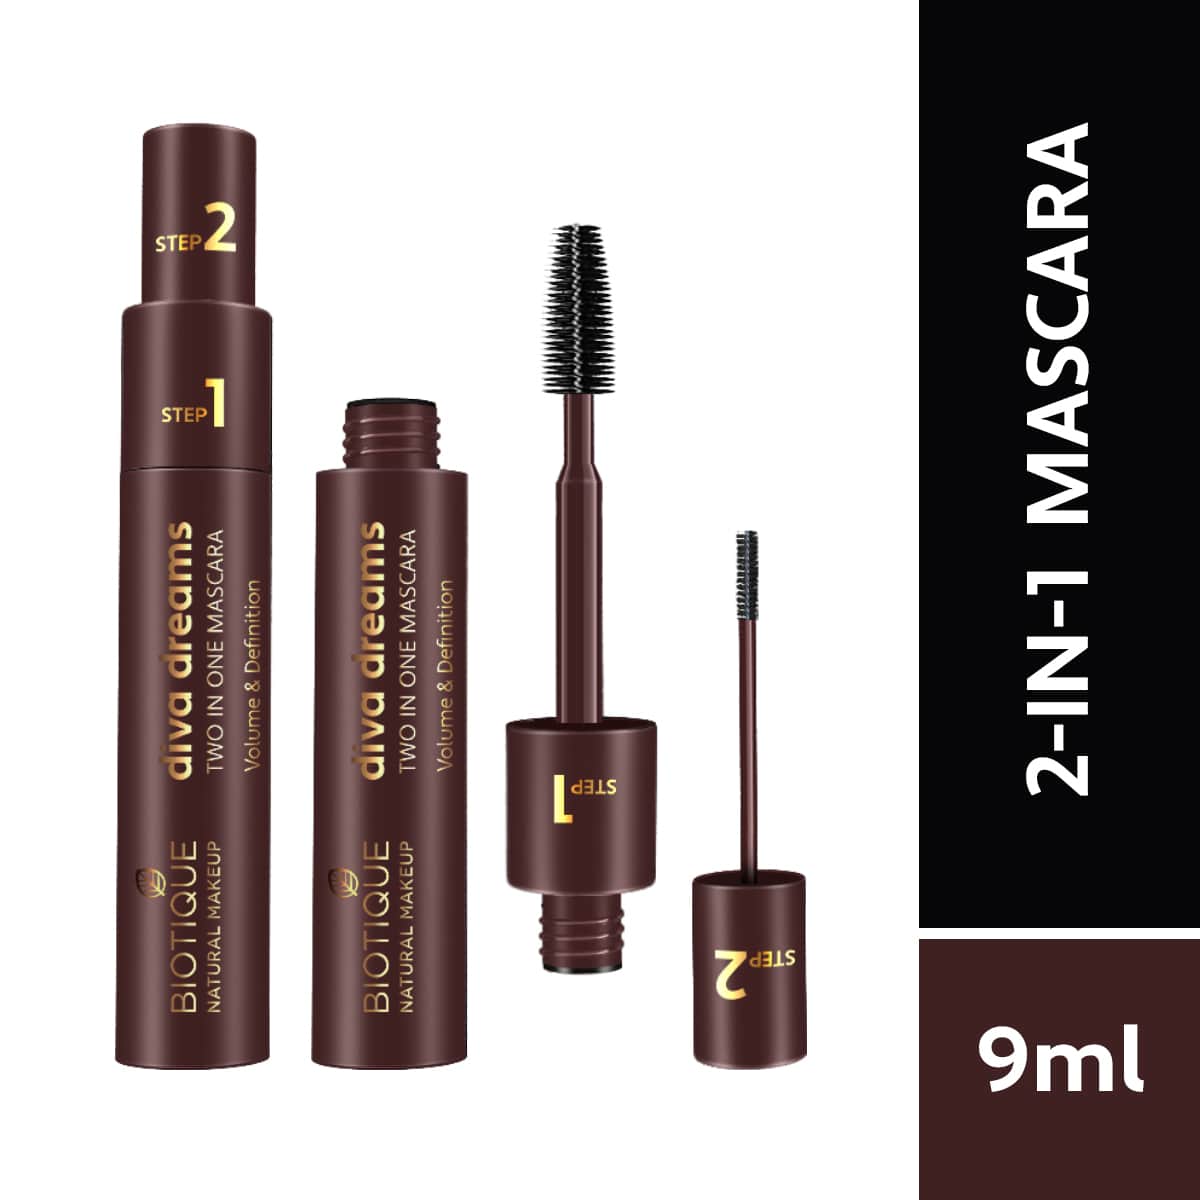 Biotique Natural Makeup Diva Dreams Two In One Mascara, 9ml